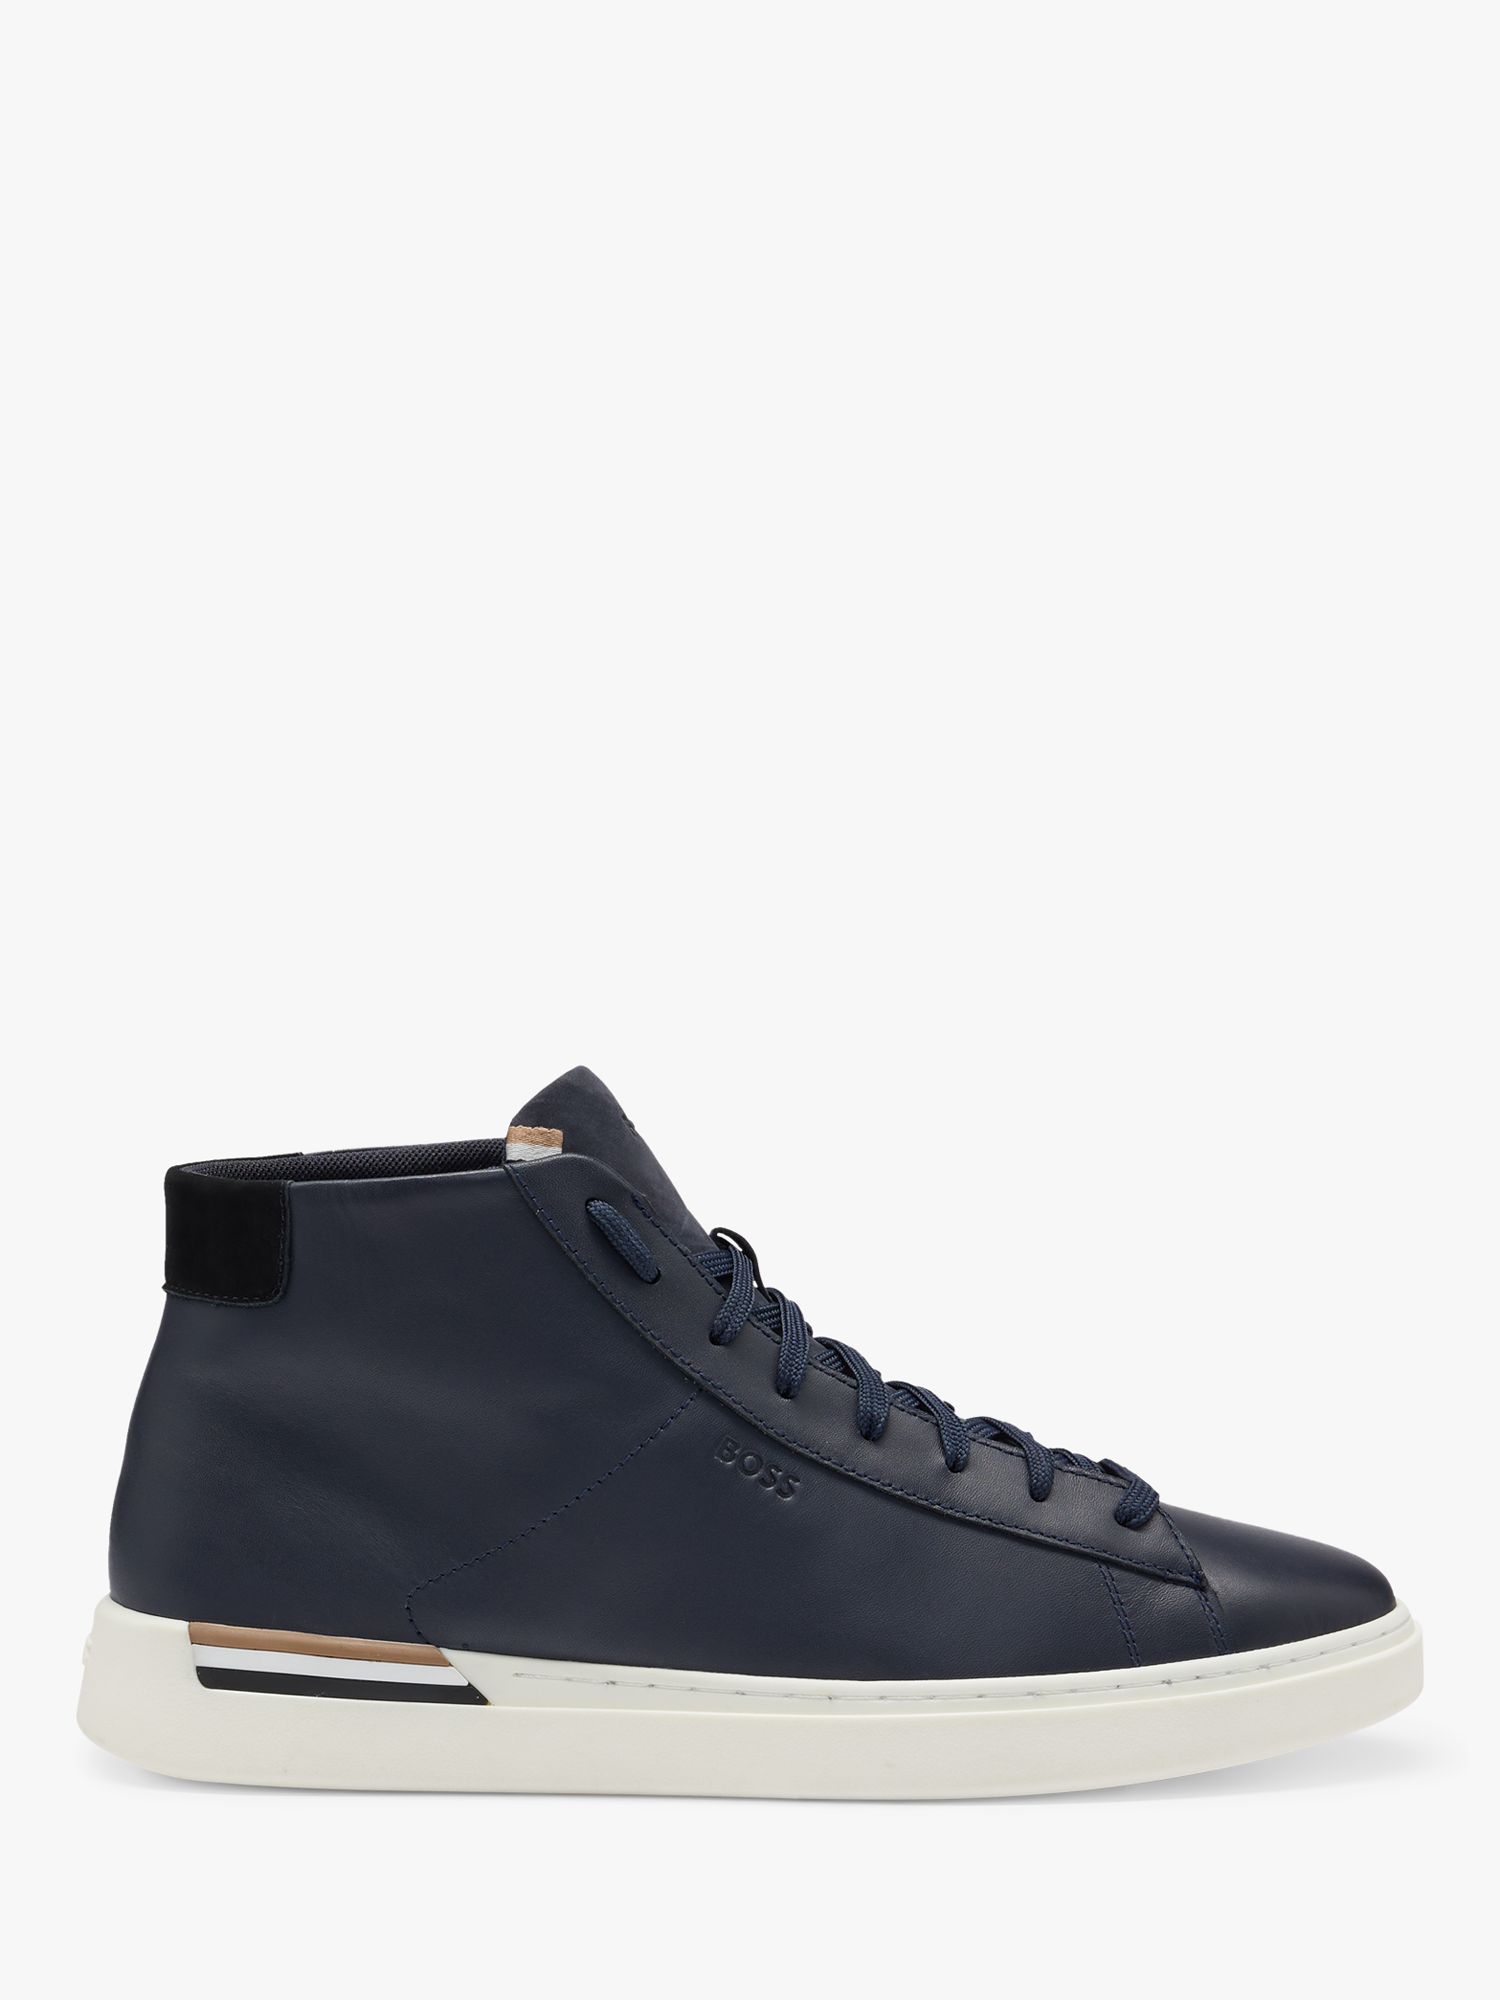 BOSS Clint Hito High-Top Trainers, Navy at John Lewis & Partners